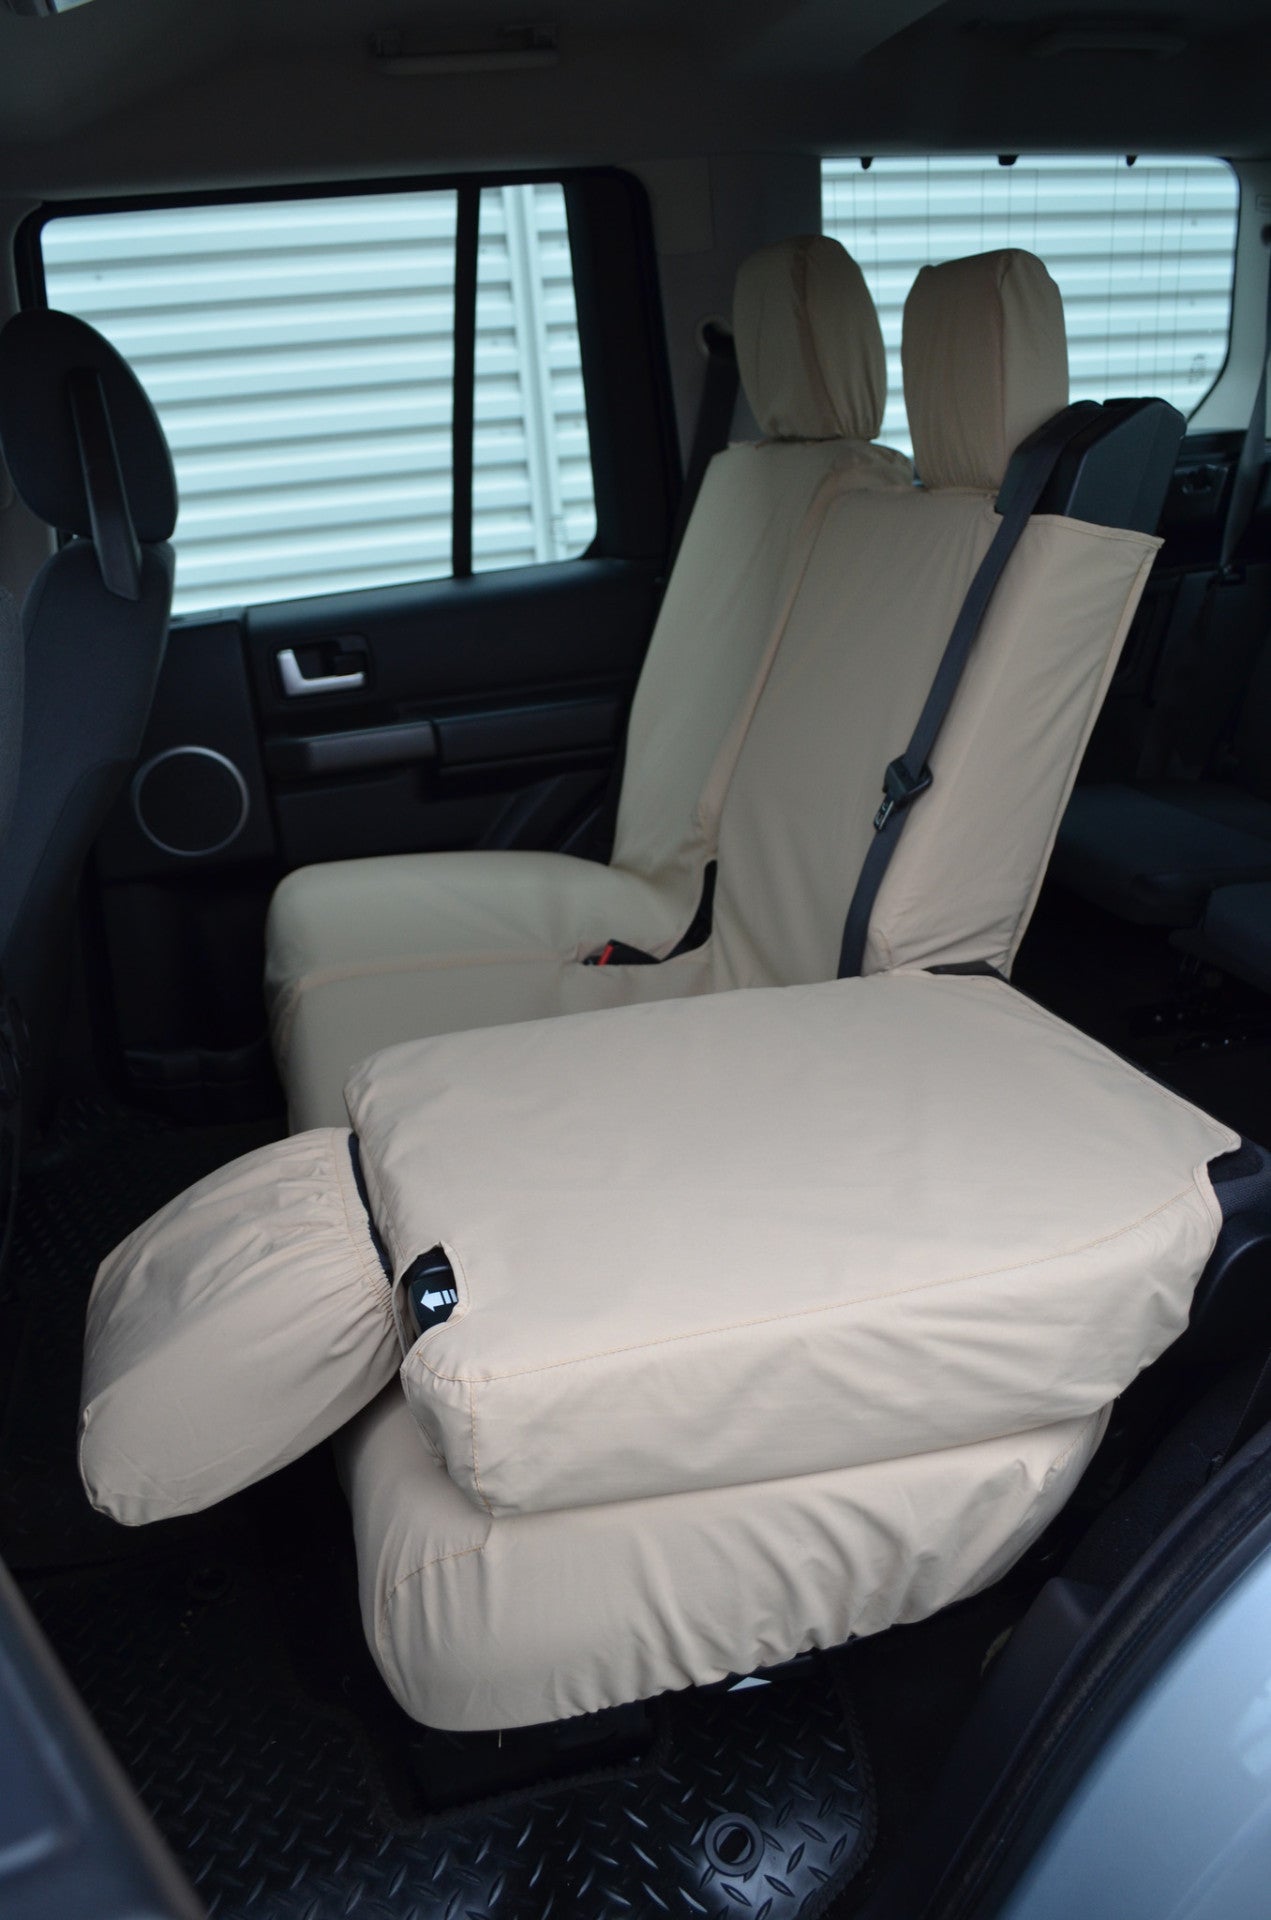 Land Rover Discovery 3 &amp; 4 (2004-2017) Seat Covers  Turtle Covers Ltd